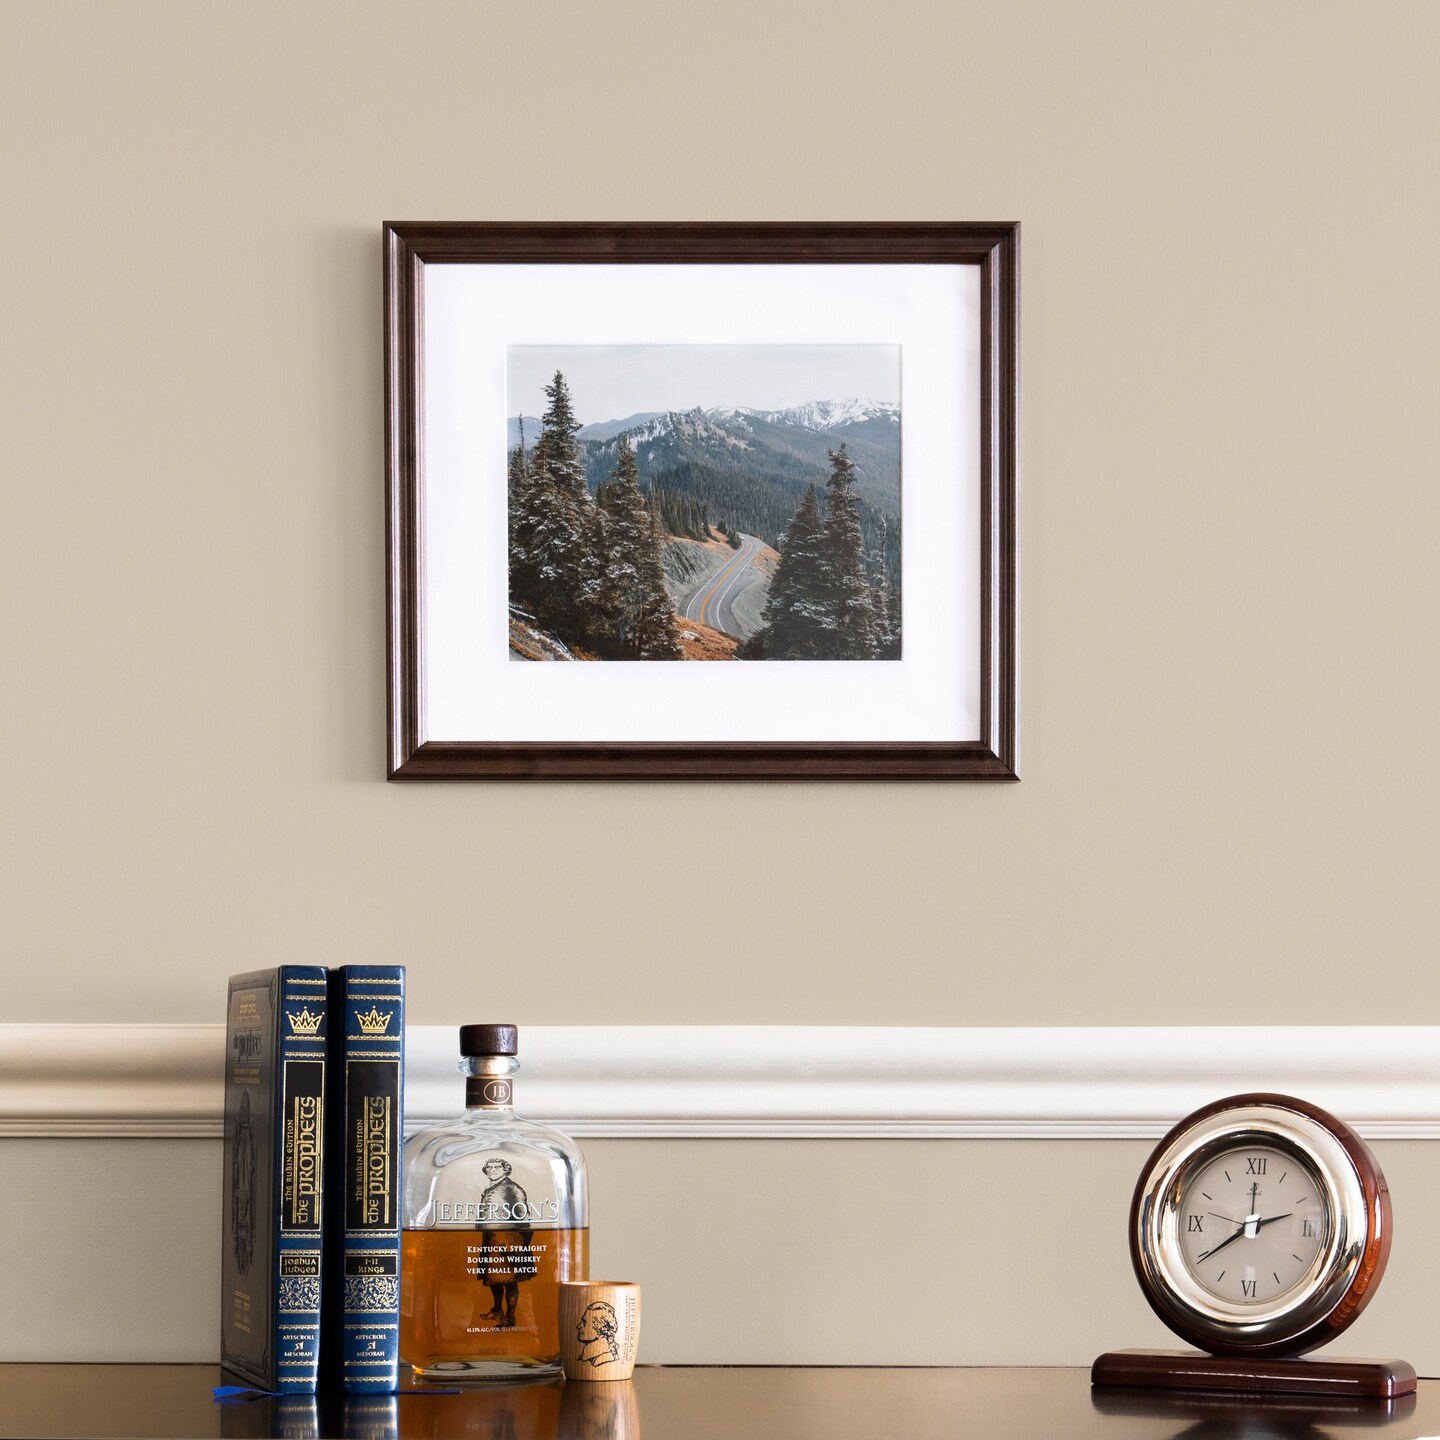 ArtToFrames 11x17 Inch  Picture Frame, This 1 Inch Custom Wood Poster Frame is Available in Multiple Colors, Great for Your Art or Photos - Comes with Regular Glass and  Corrugated Backing (A9HI)